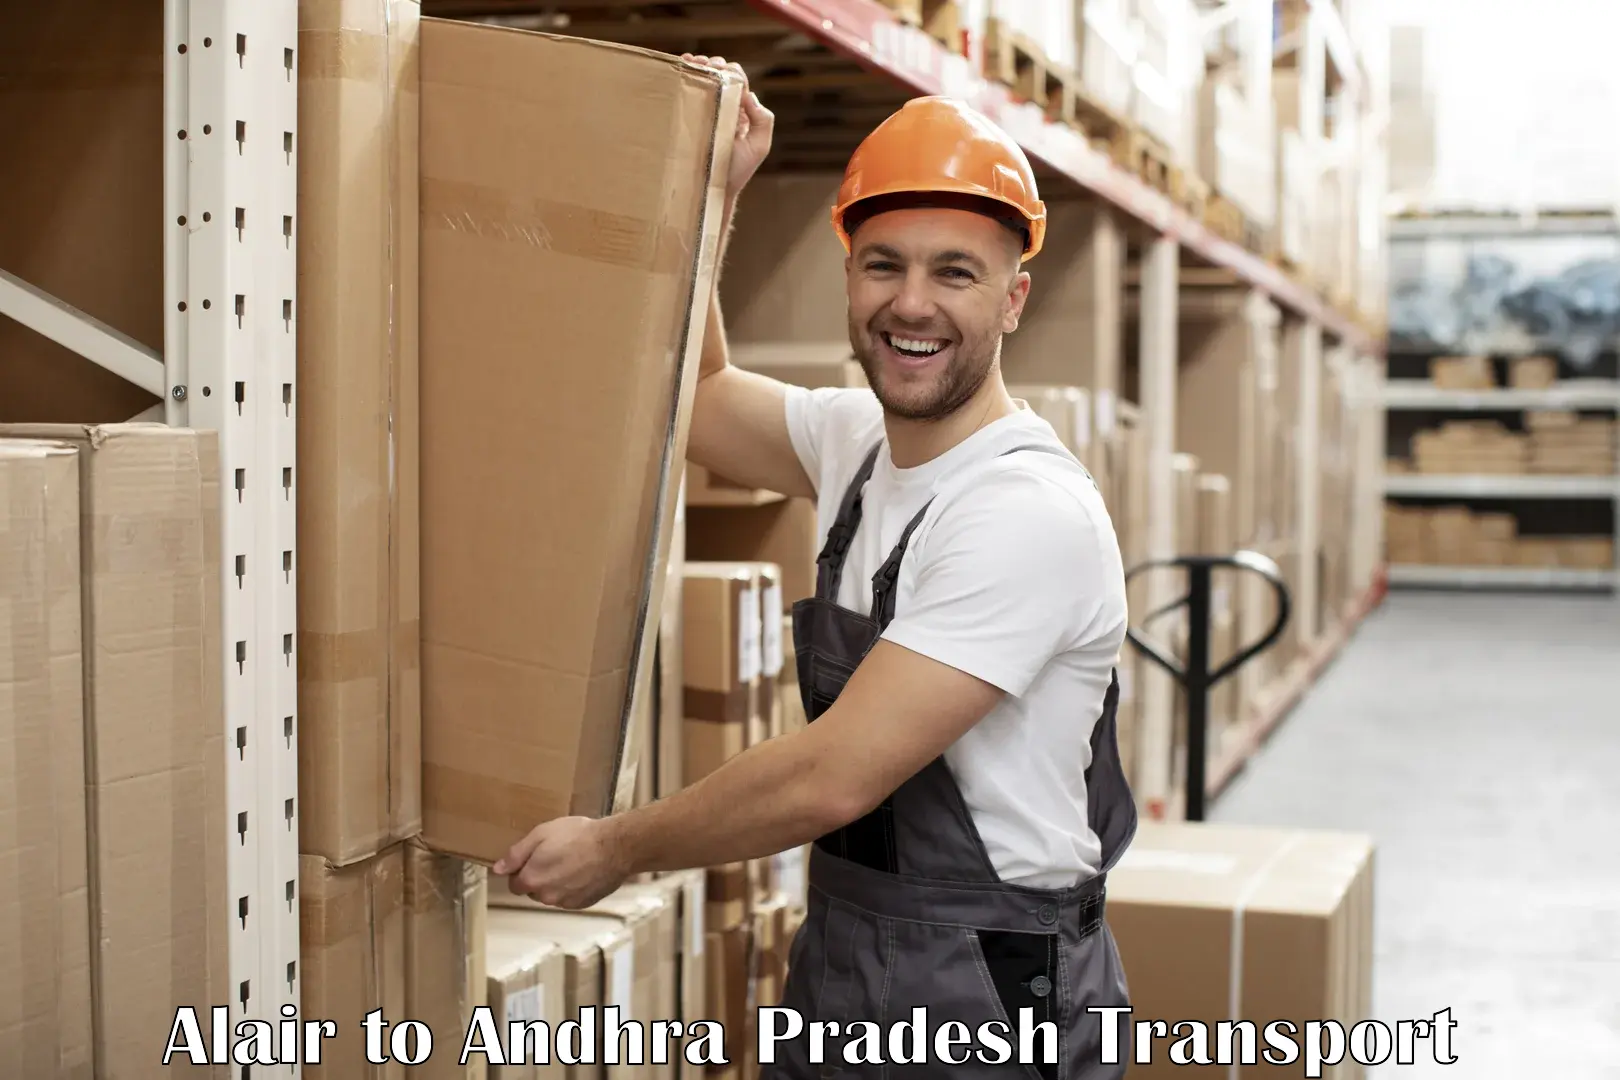 Cargo train transport services in Alair to Andhra Pradesh